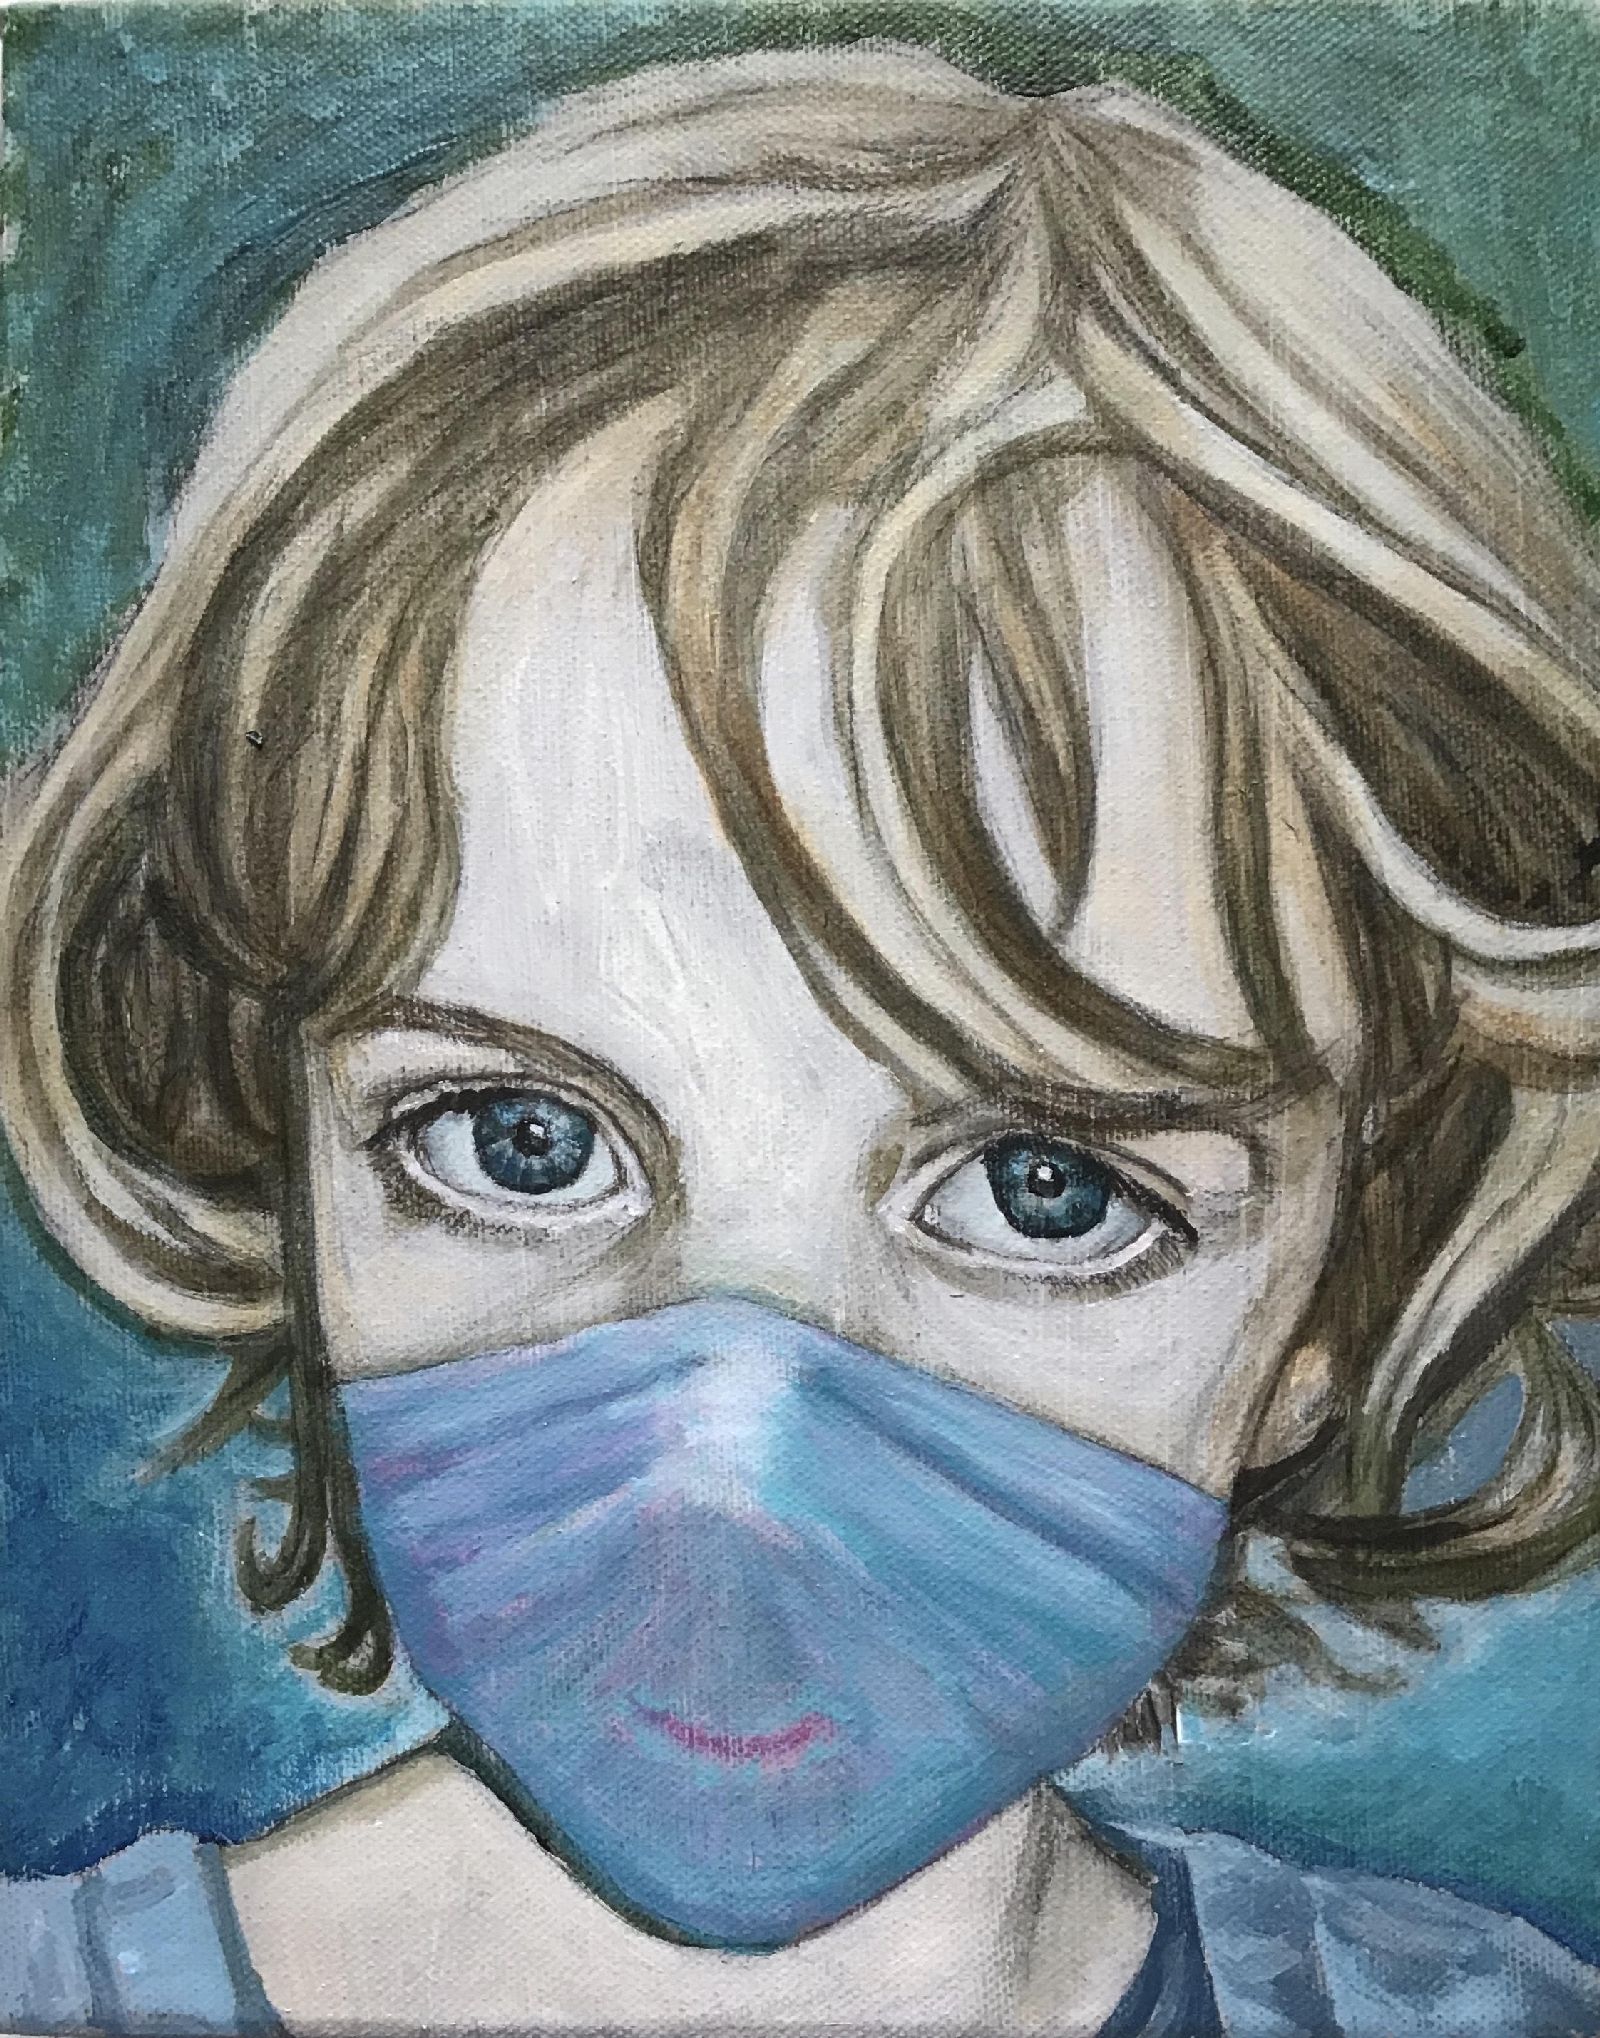 ‘Girl with a face mask’ by Christopher Banahan